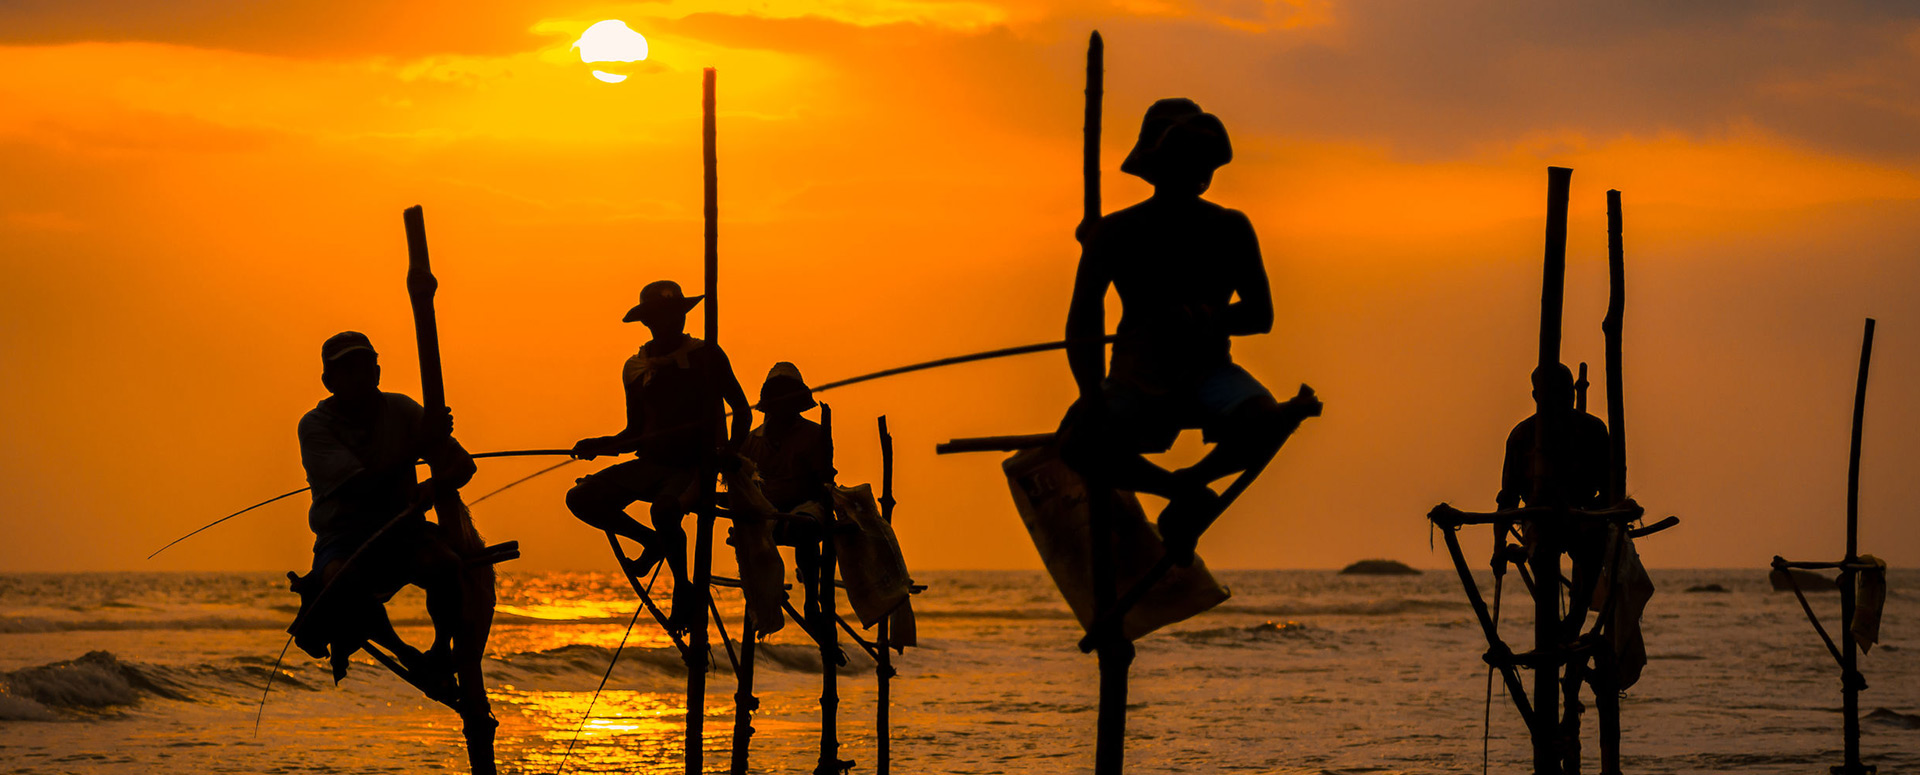 Silhouettes of the traditional Stilt fishermen during sunset